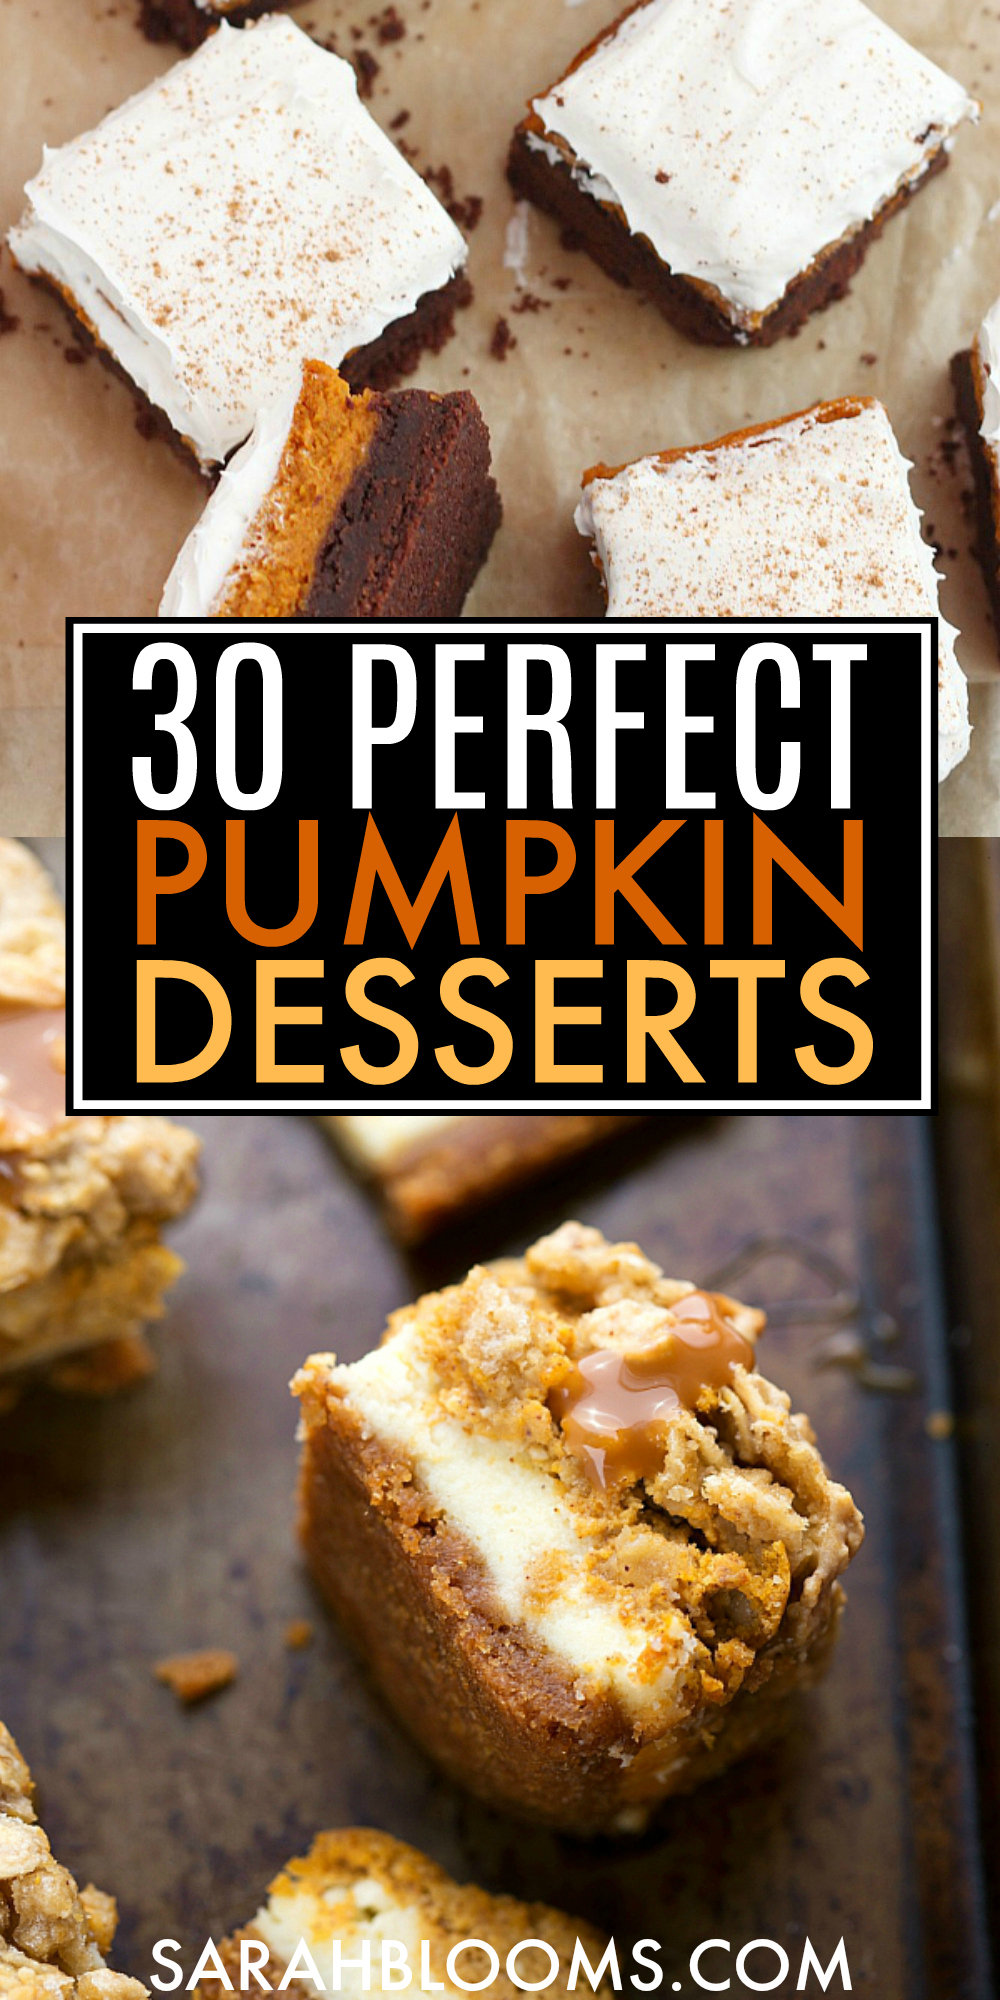 Bake up some easy and delicious pumpkin desserts perfect for fall holidays and parties! #pumpkinrecipes #fallrecipes #pumpkindesserts #falldesserts #dessertrecipes #falldessertrecipes #pumpkindessertrecipes #SarahBlooms